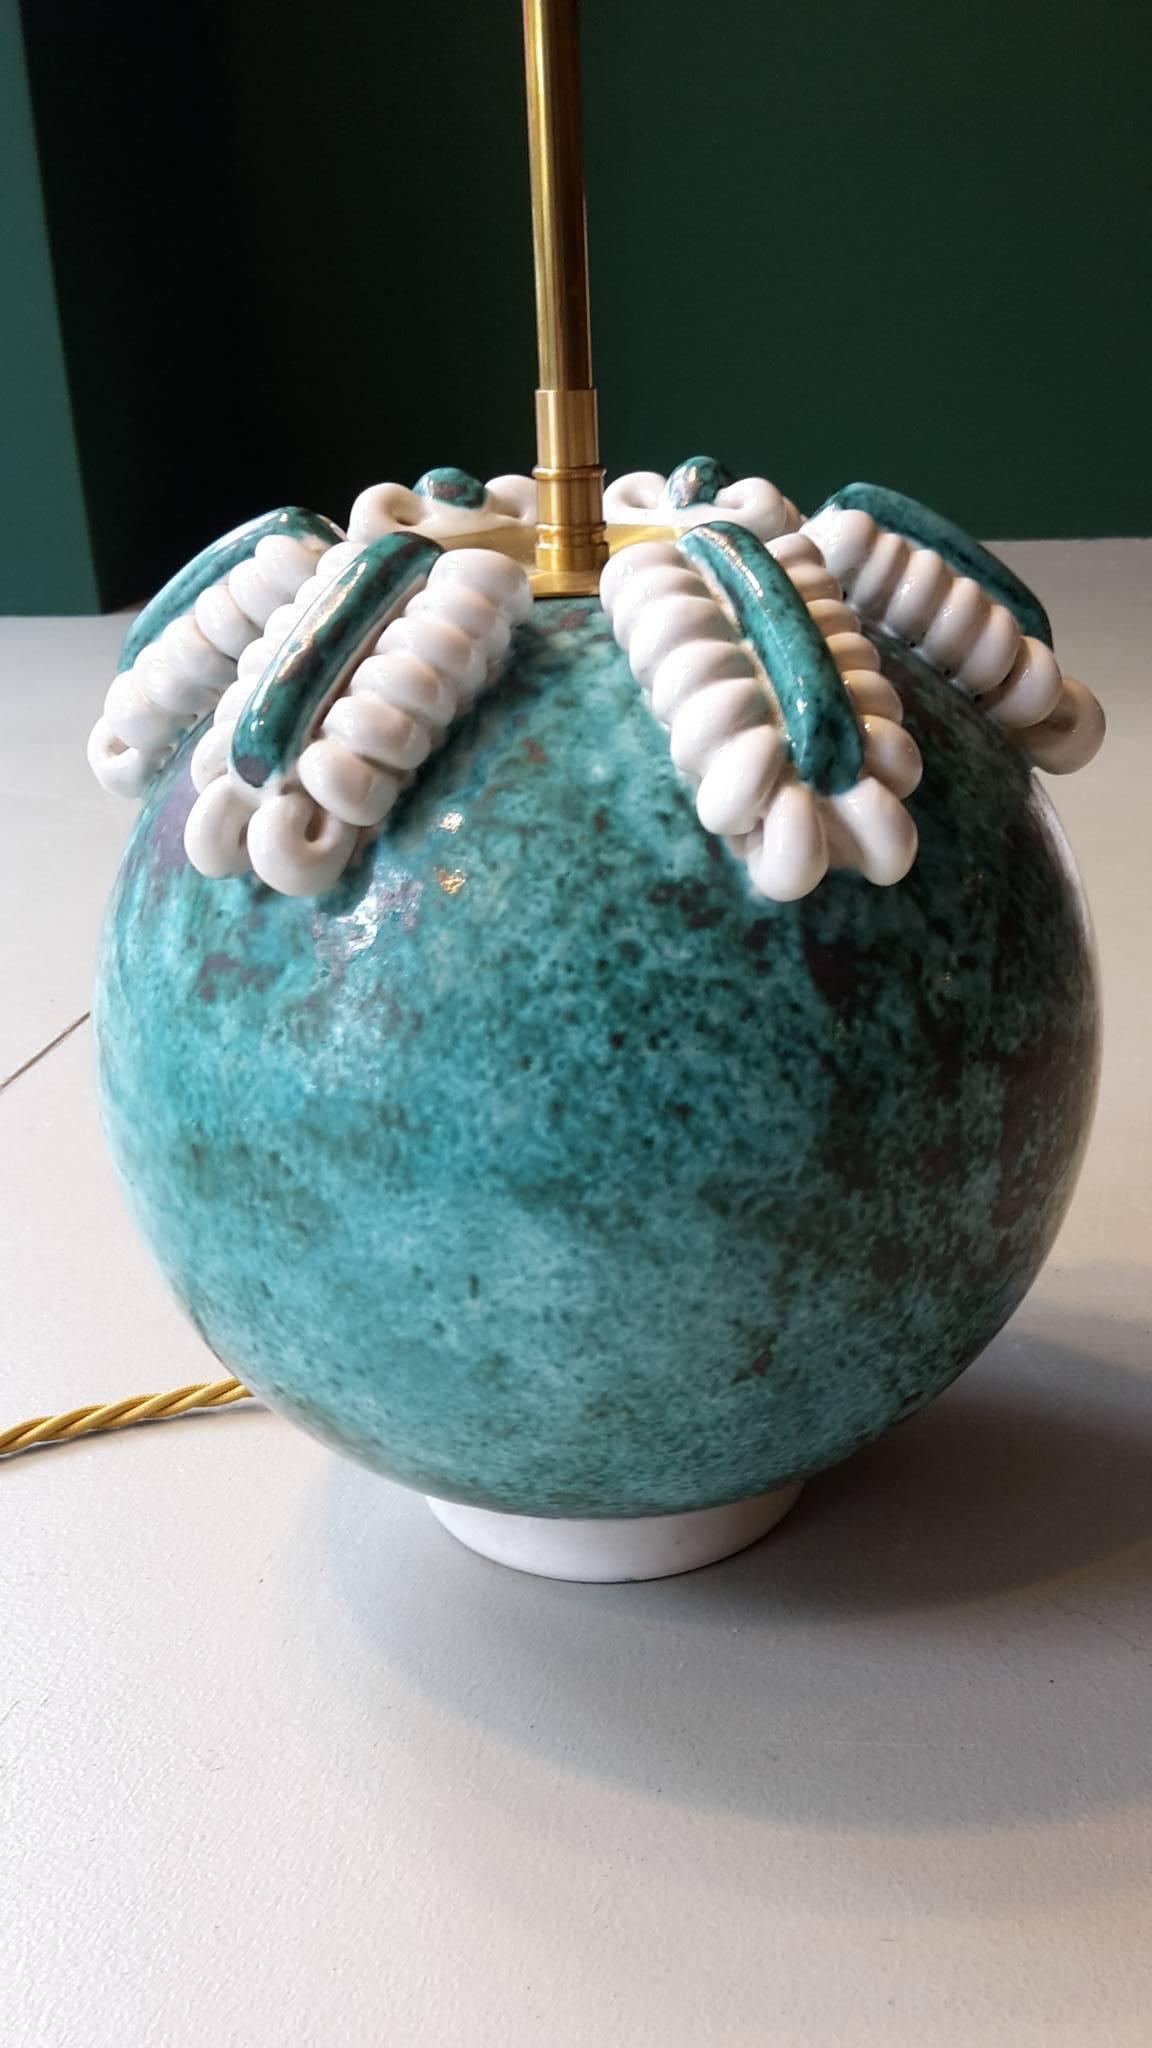 Early 20th century Art Deco table lamp made of turquoise and white ceramic.